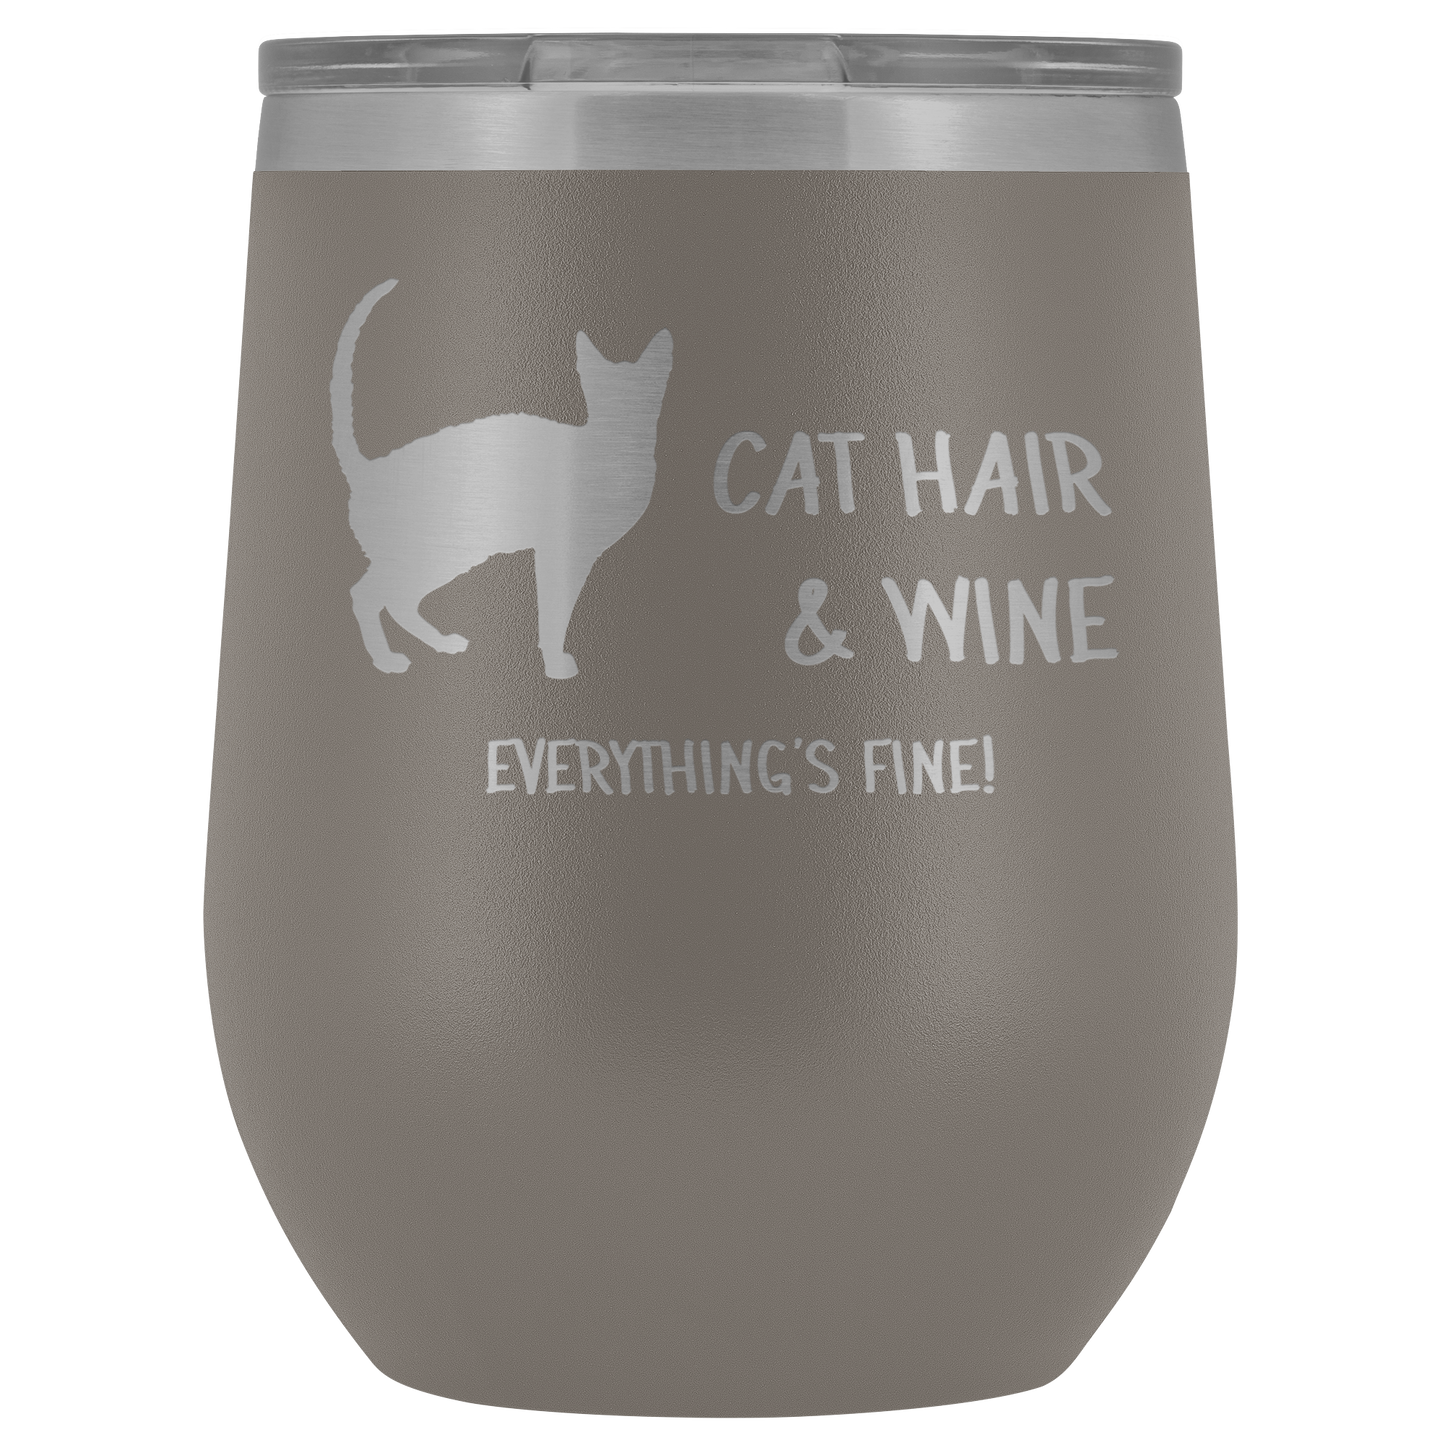 Cat Hair & Wine Everything's Fine Wine Cup